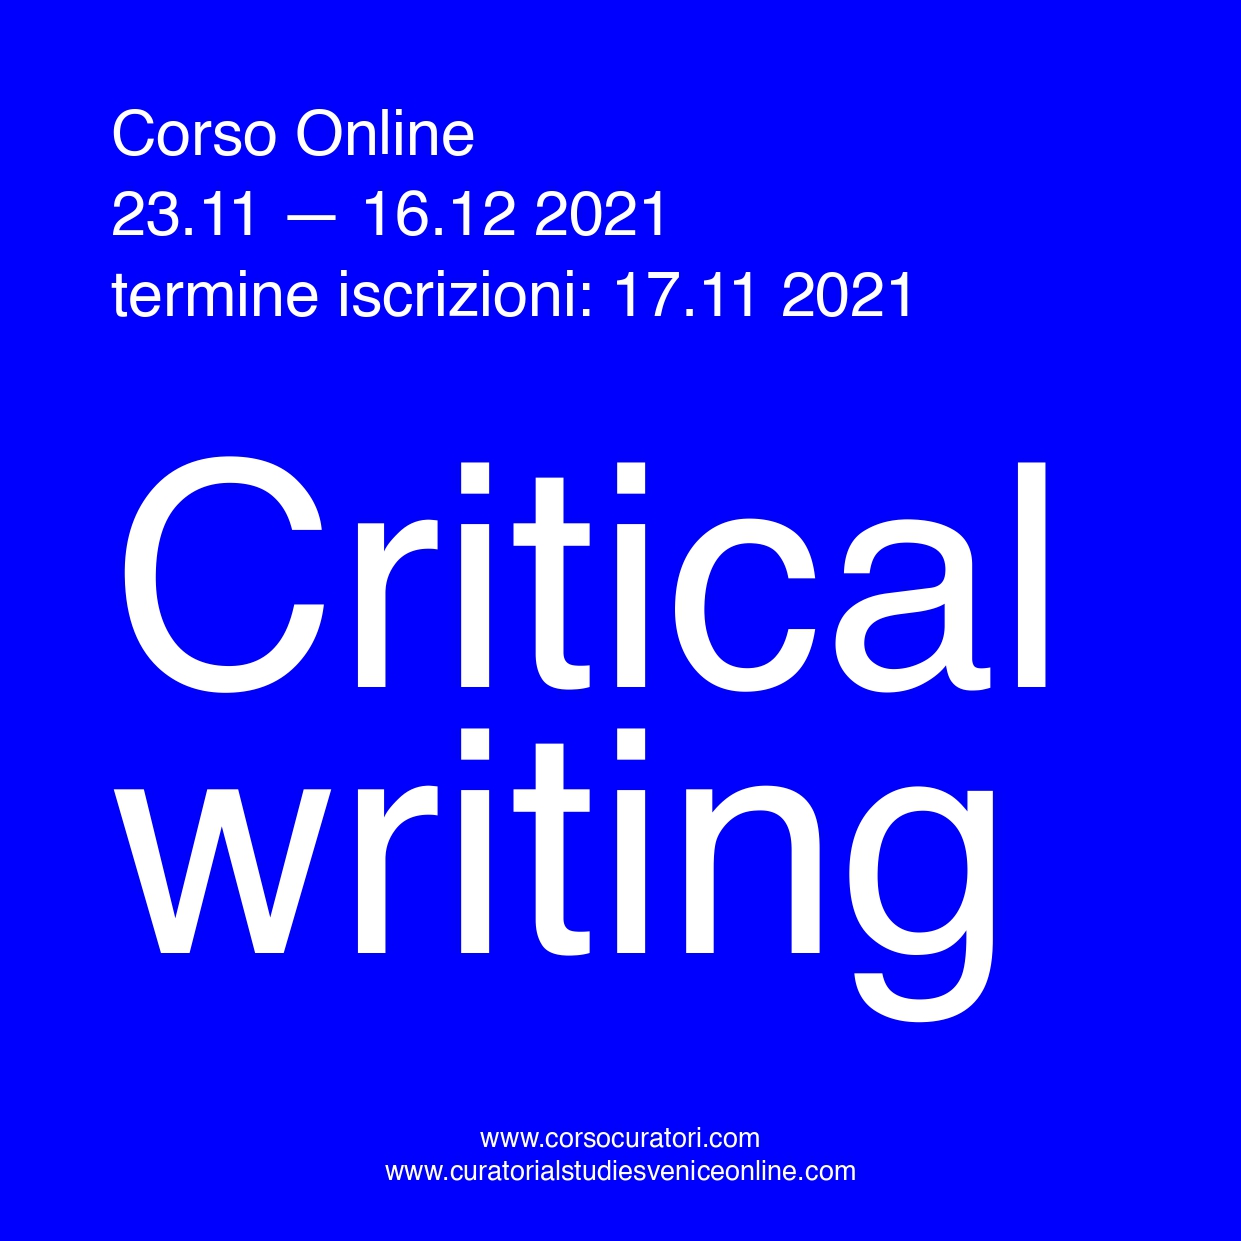 Workshop online in critical writing